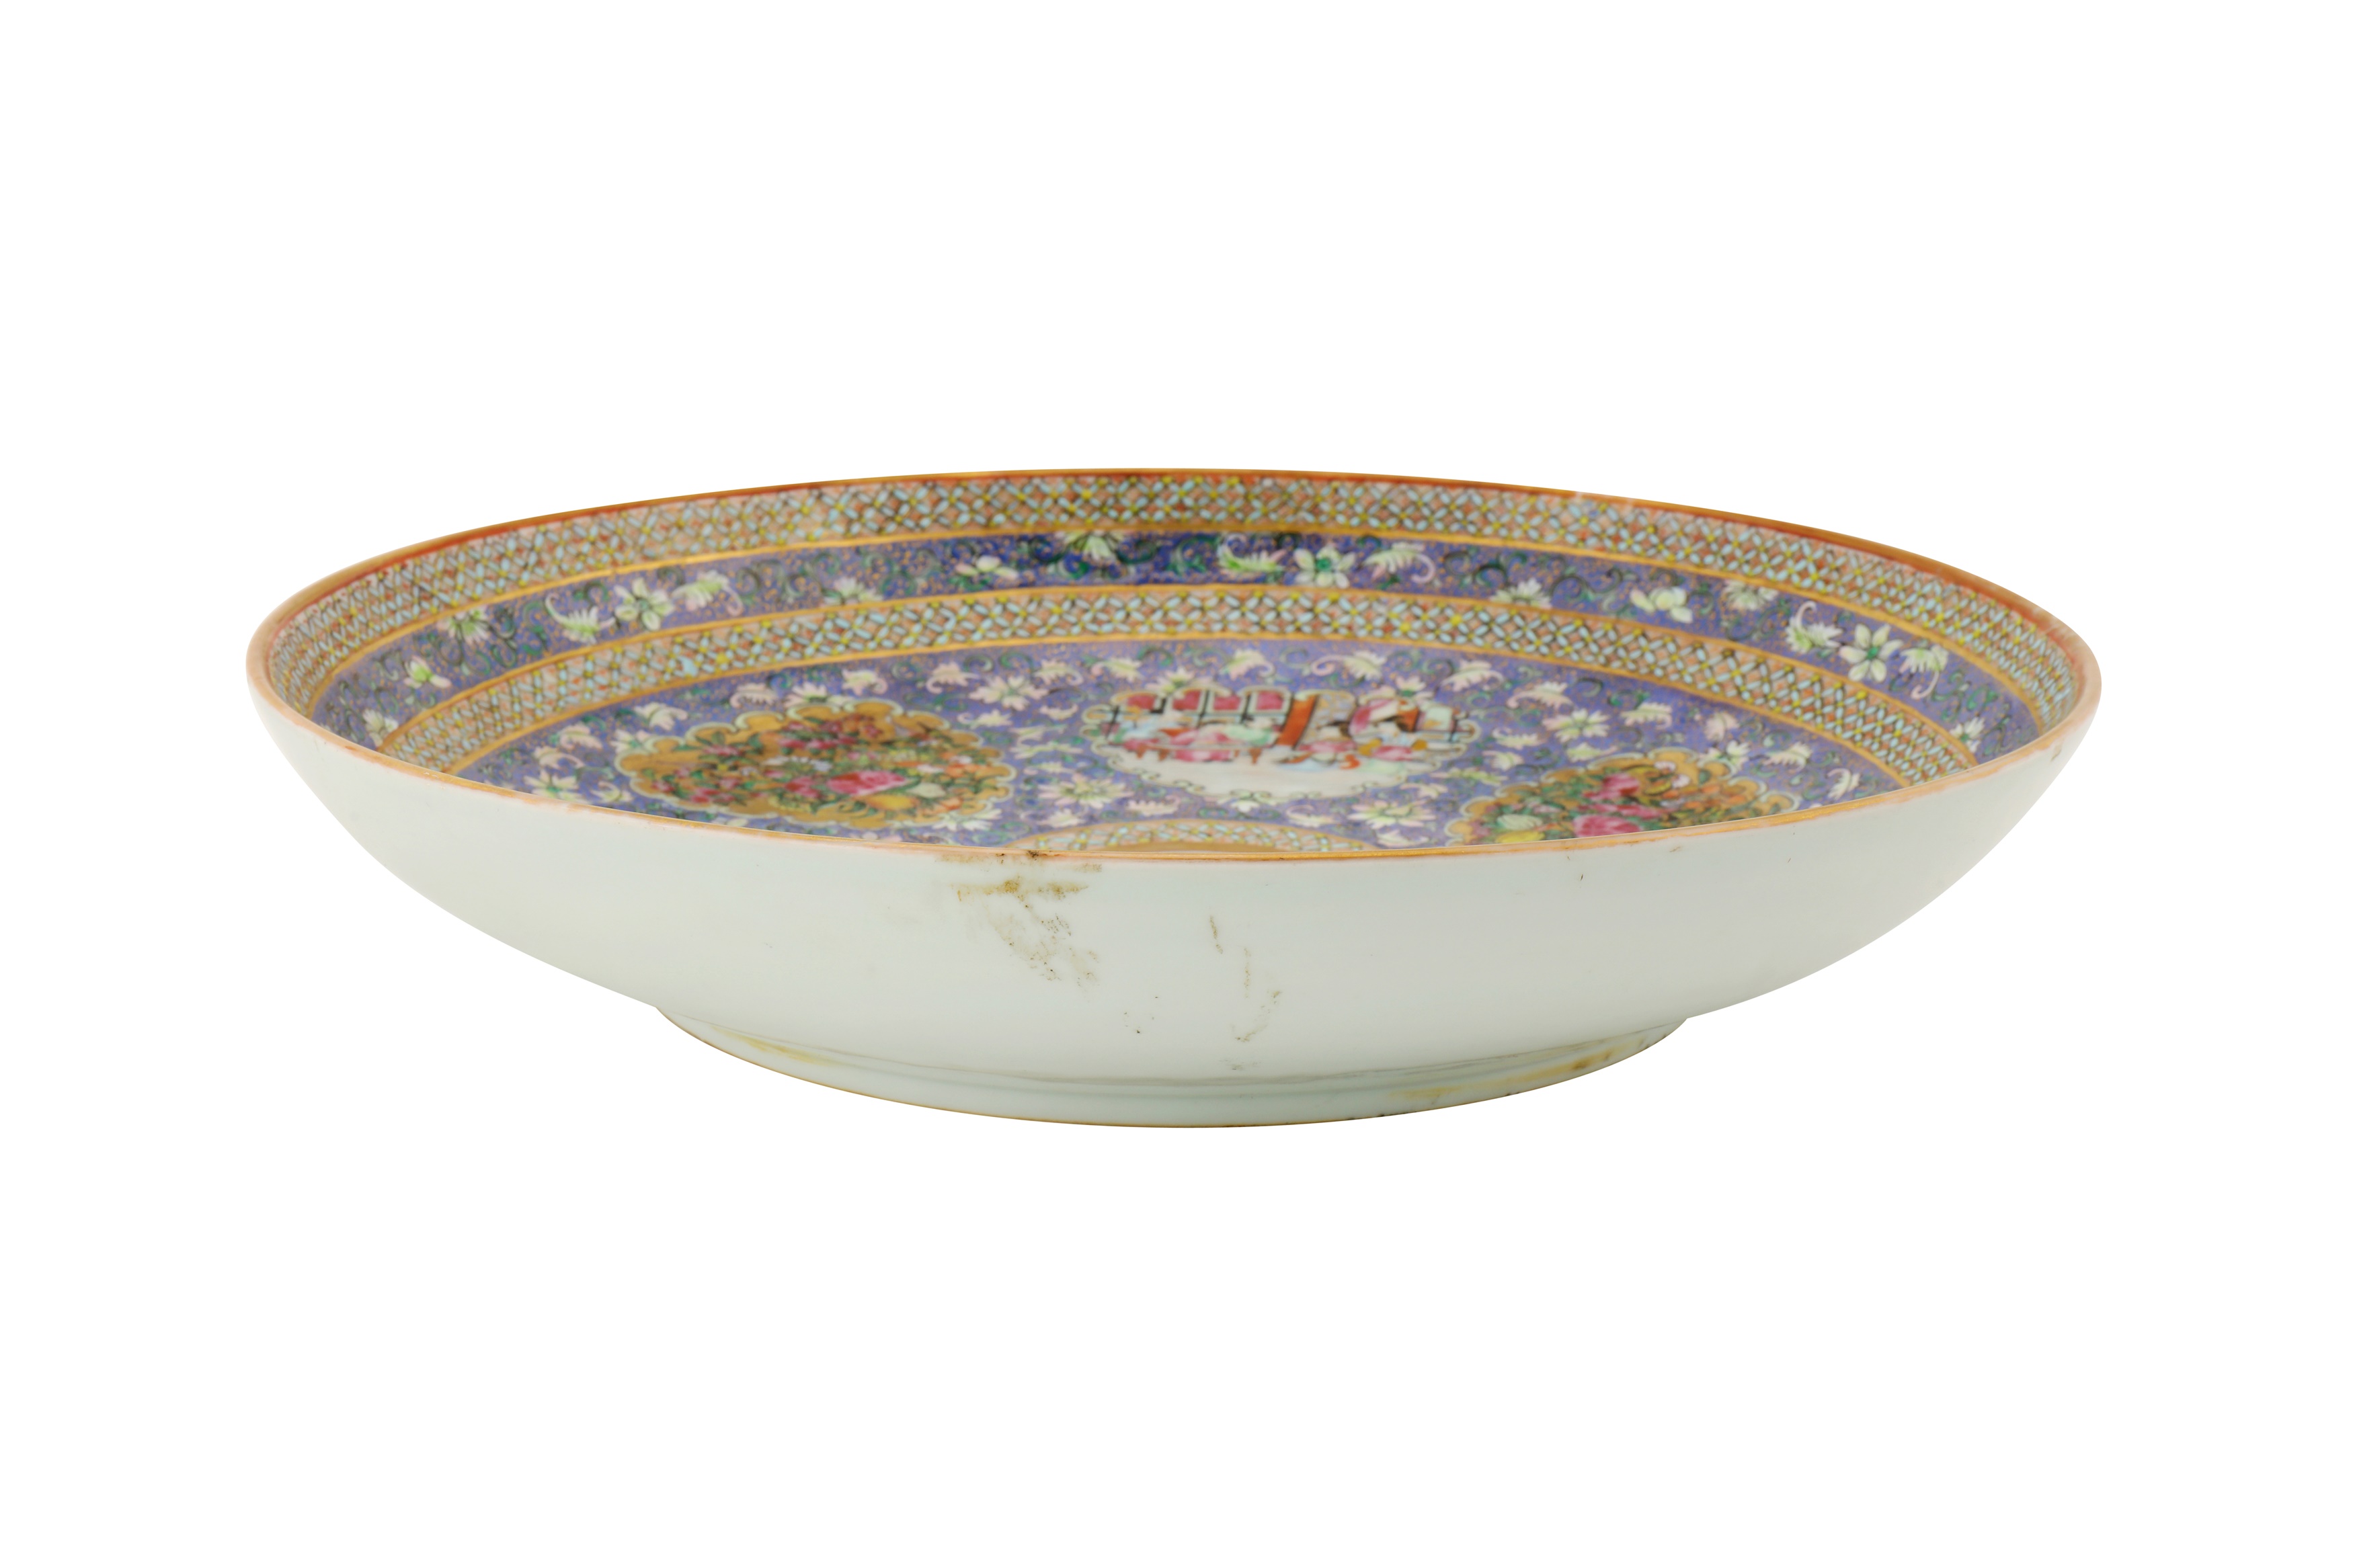 A LARGE BOWL AND DISH FROM THE ZILL AL-SULTAN CANTON PORCELAIN SERVICE - Image 2 of 8